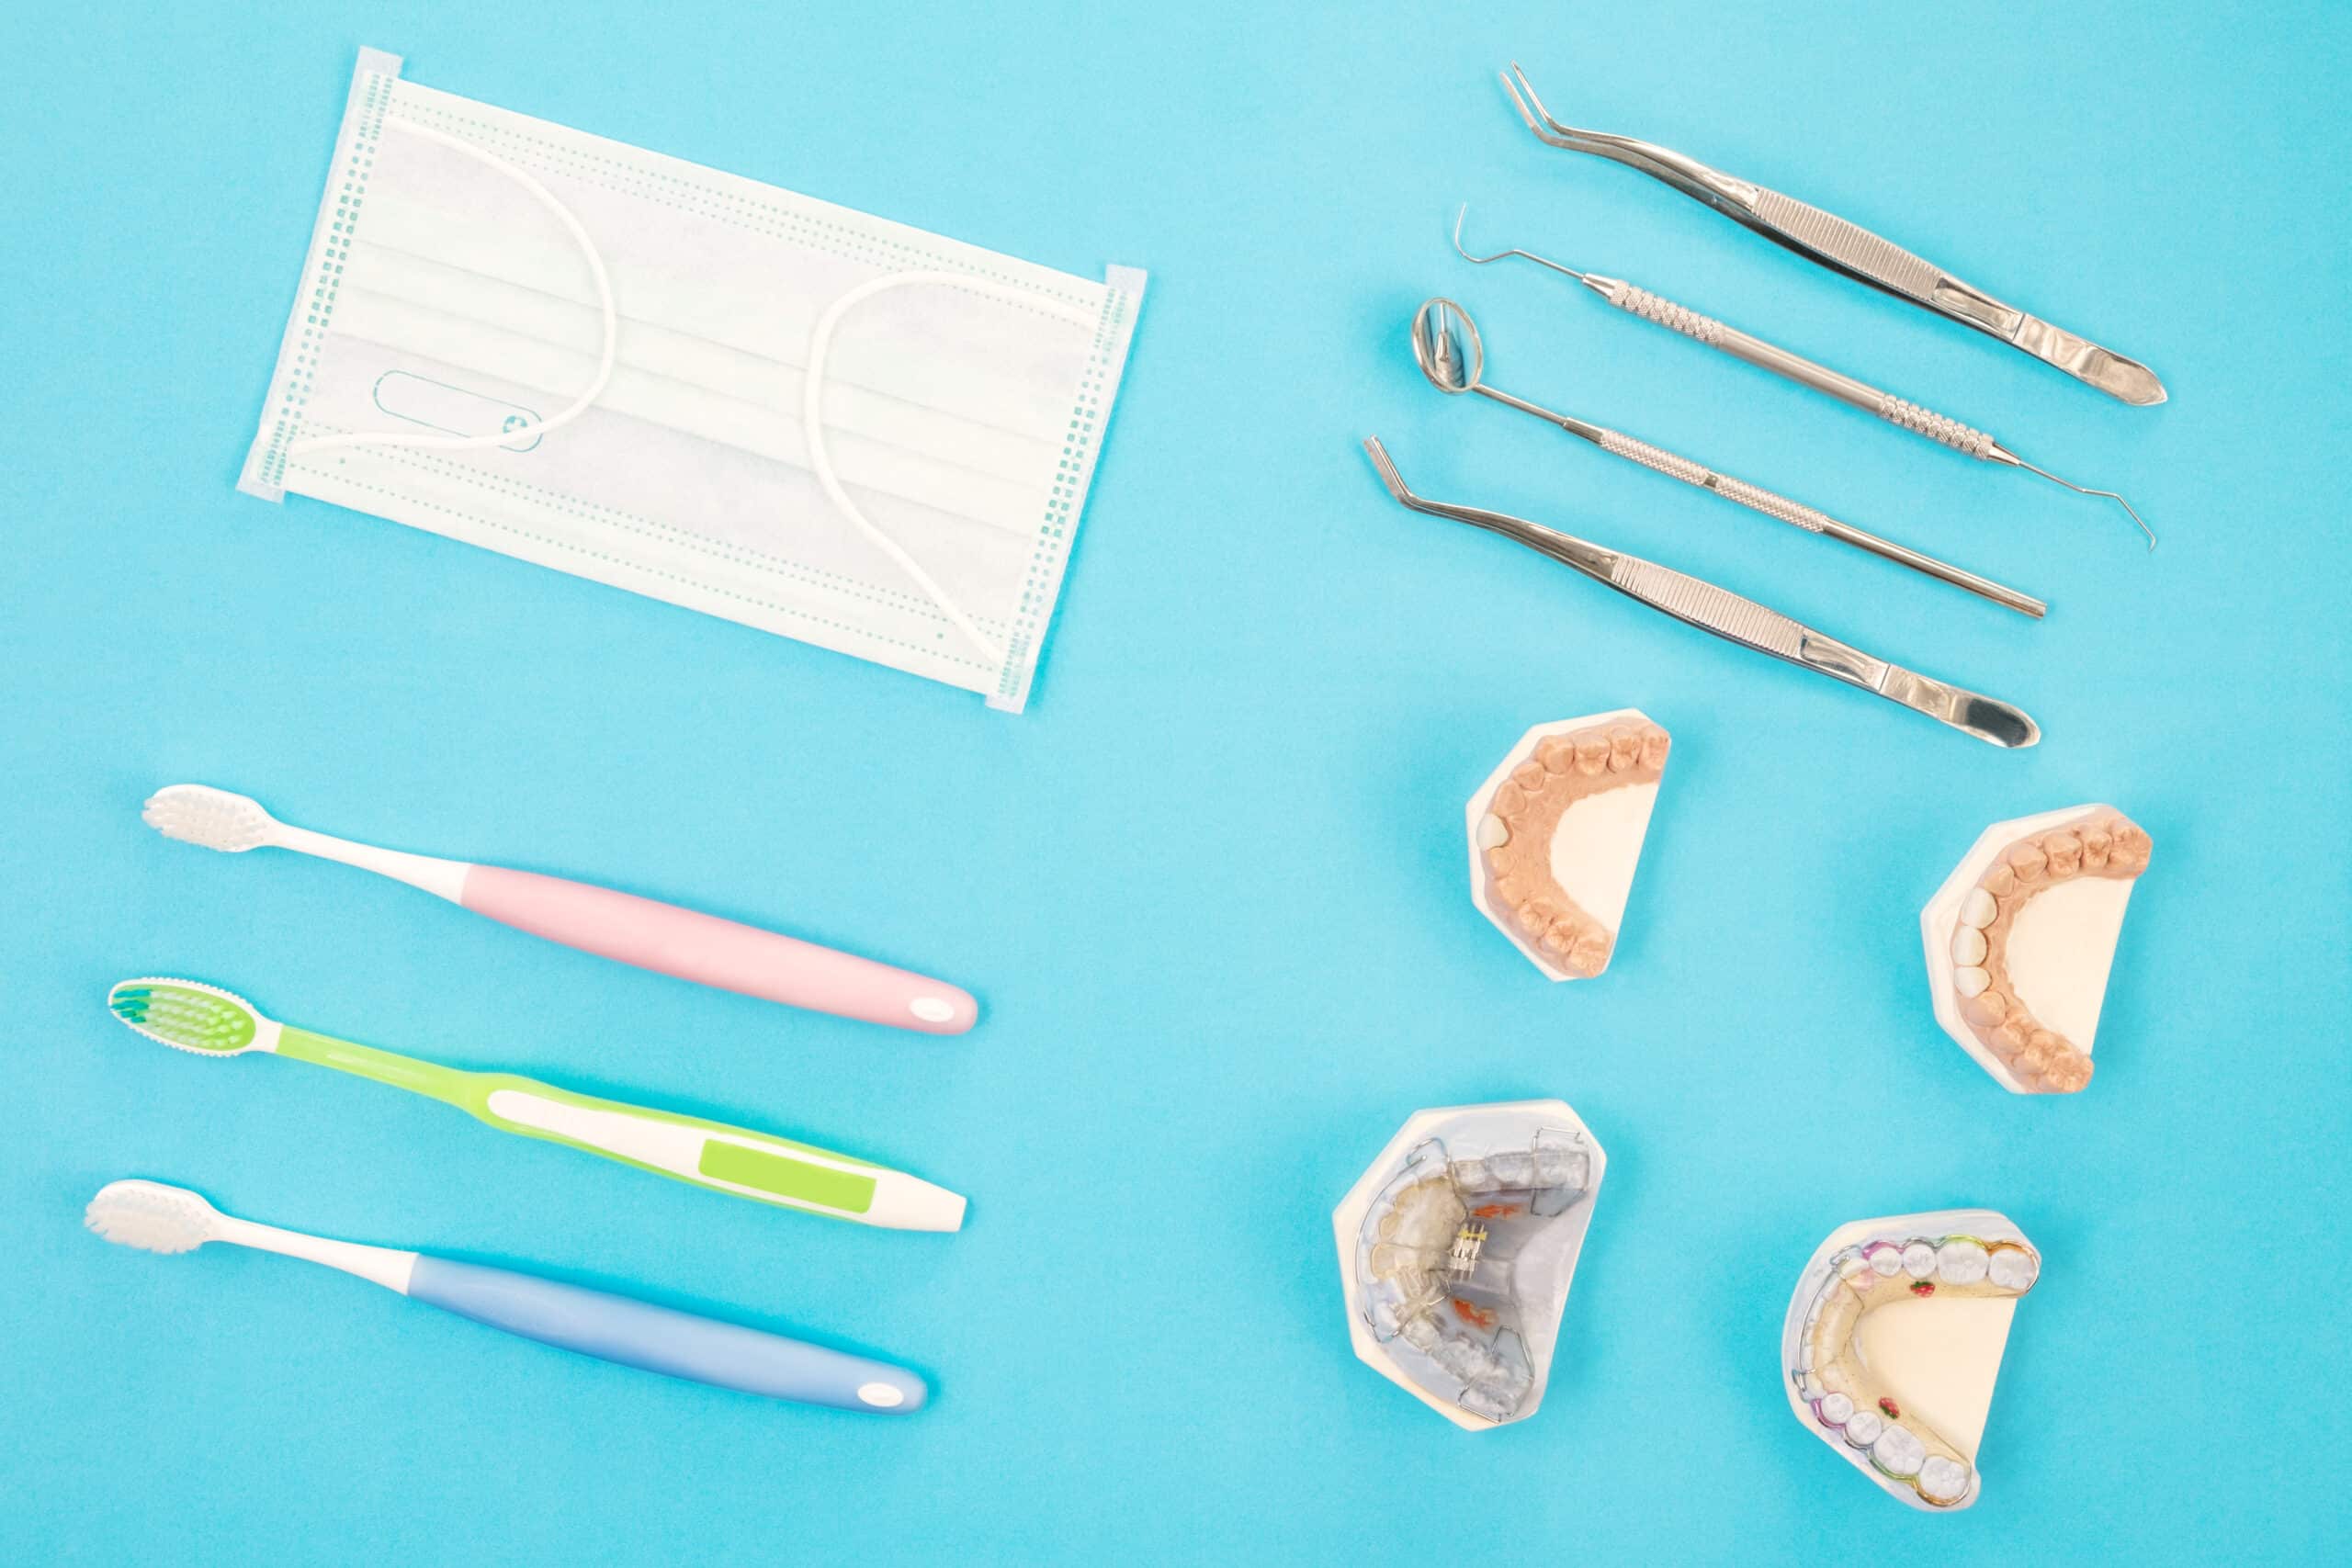 Dental tools use for dentist on the blue background